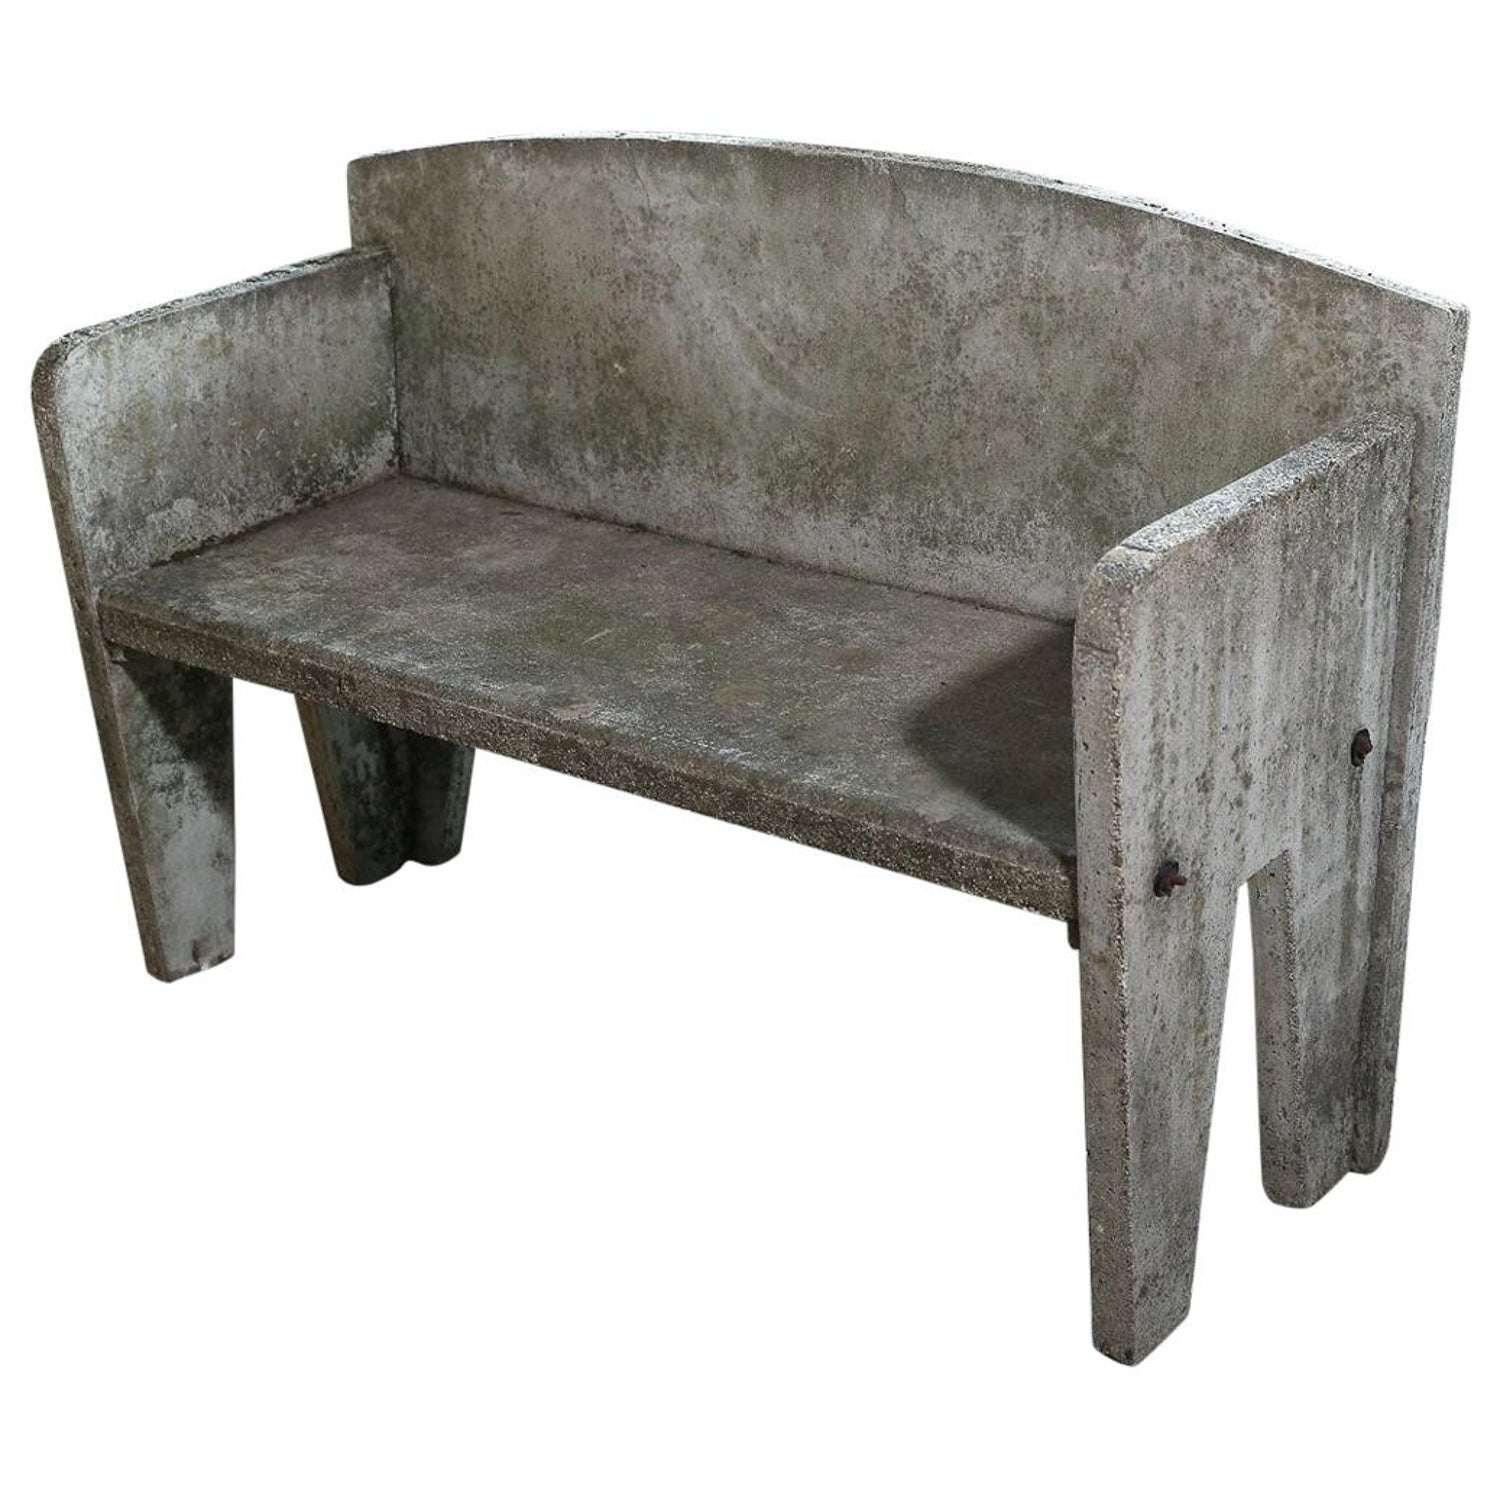 French Concrete Garden Bench At 1stdibs